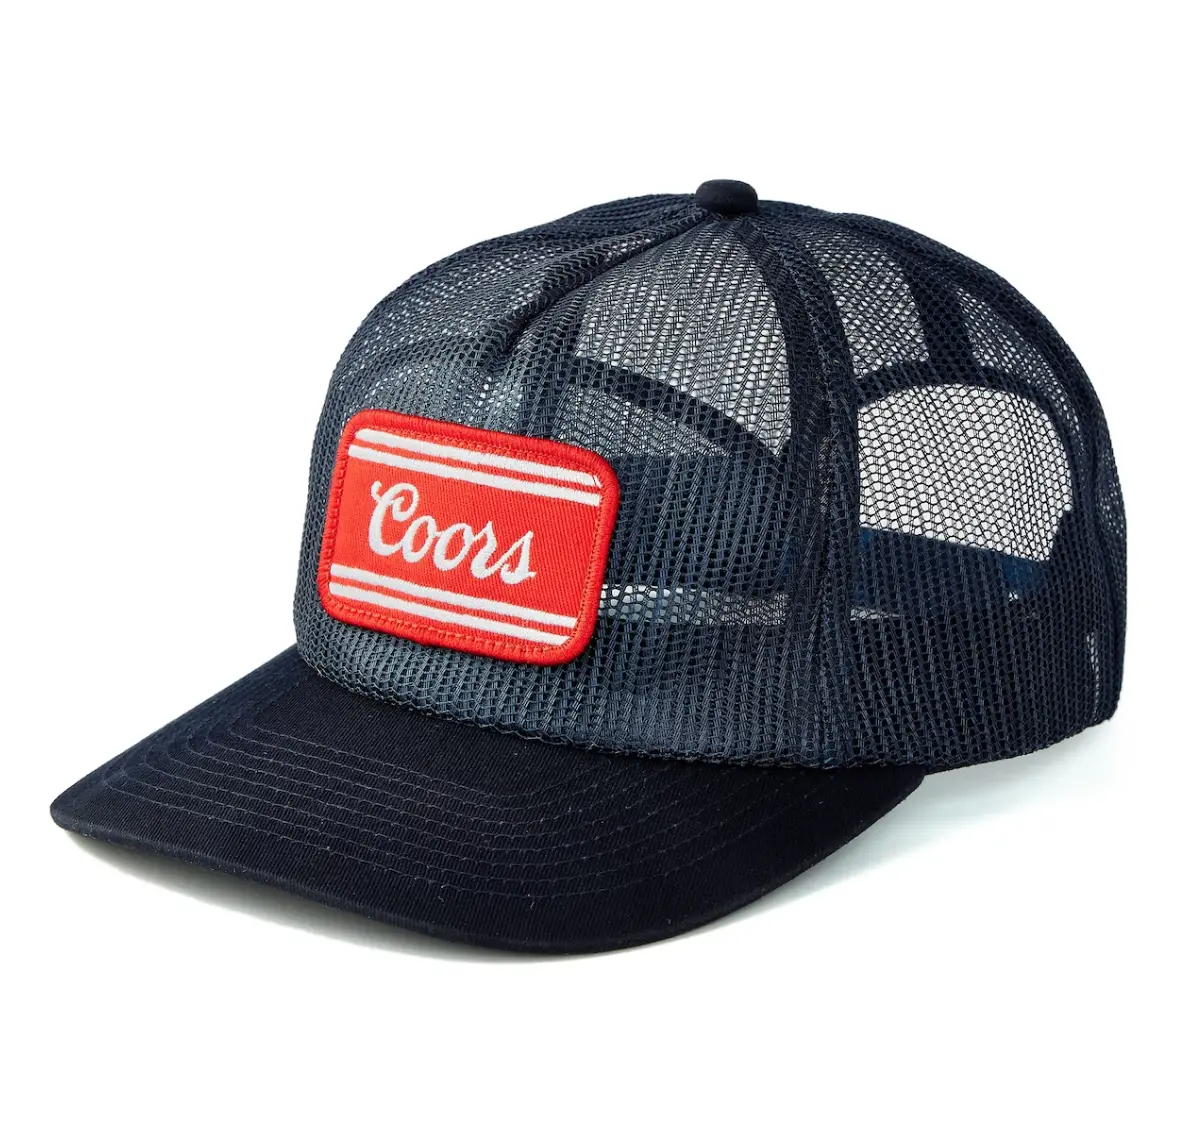 Custom patch hat with Coors logo